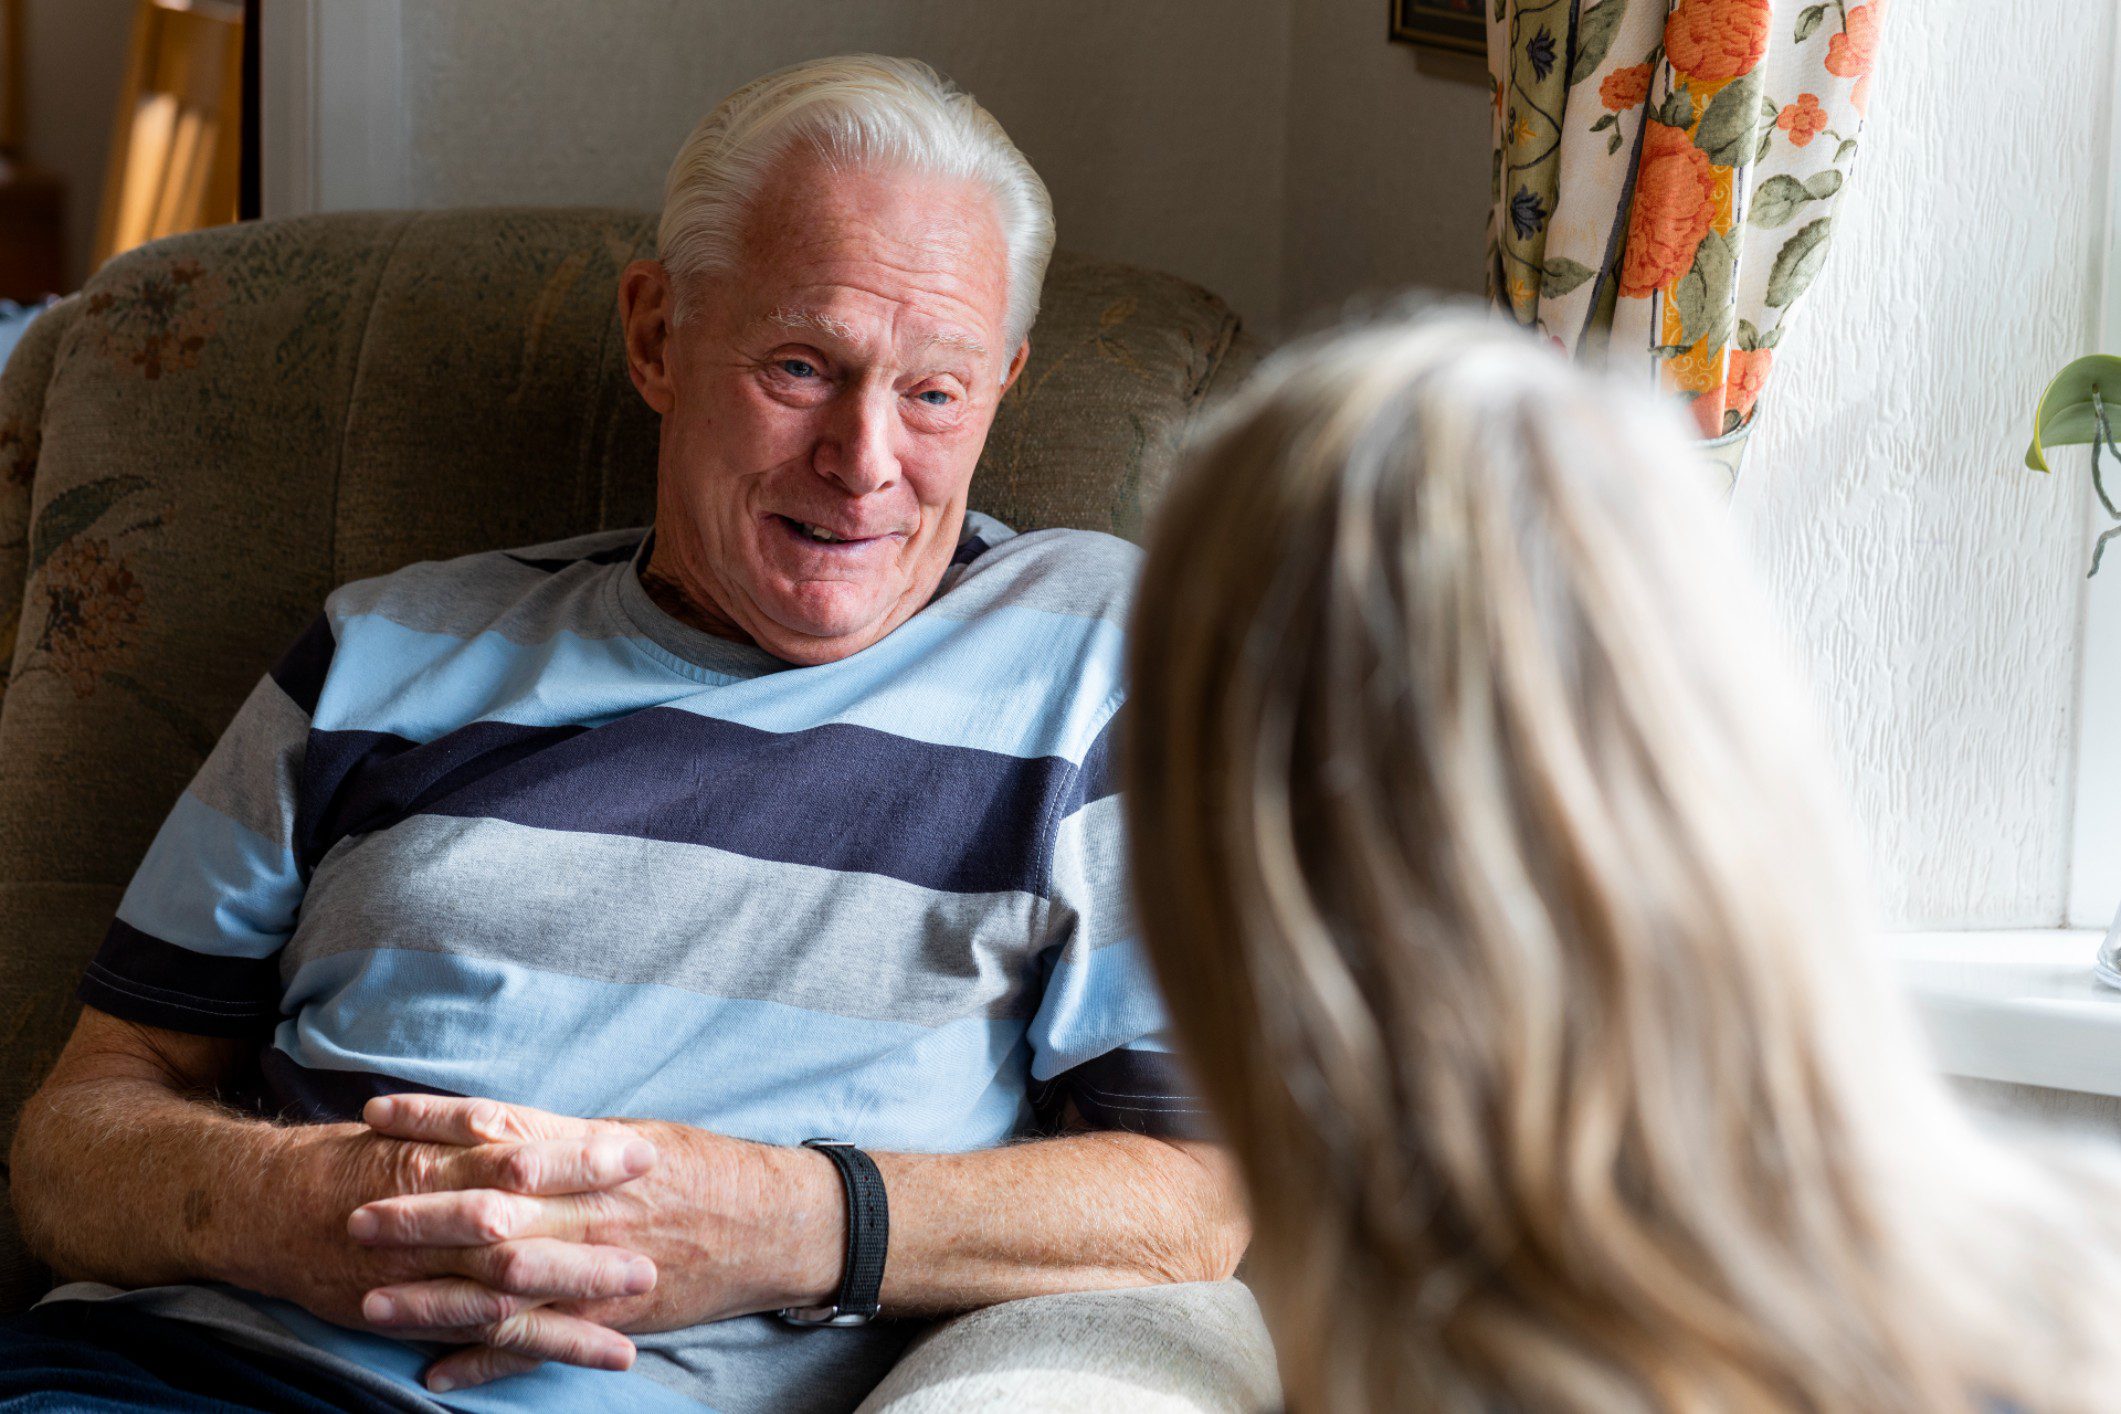 What should home care workers do for clients with dementia?